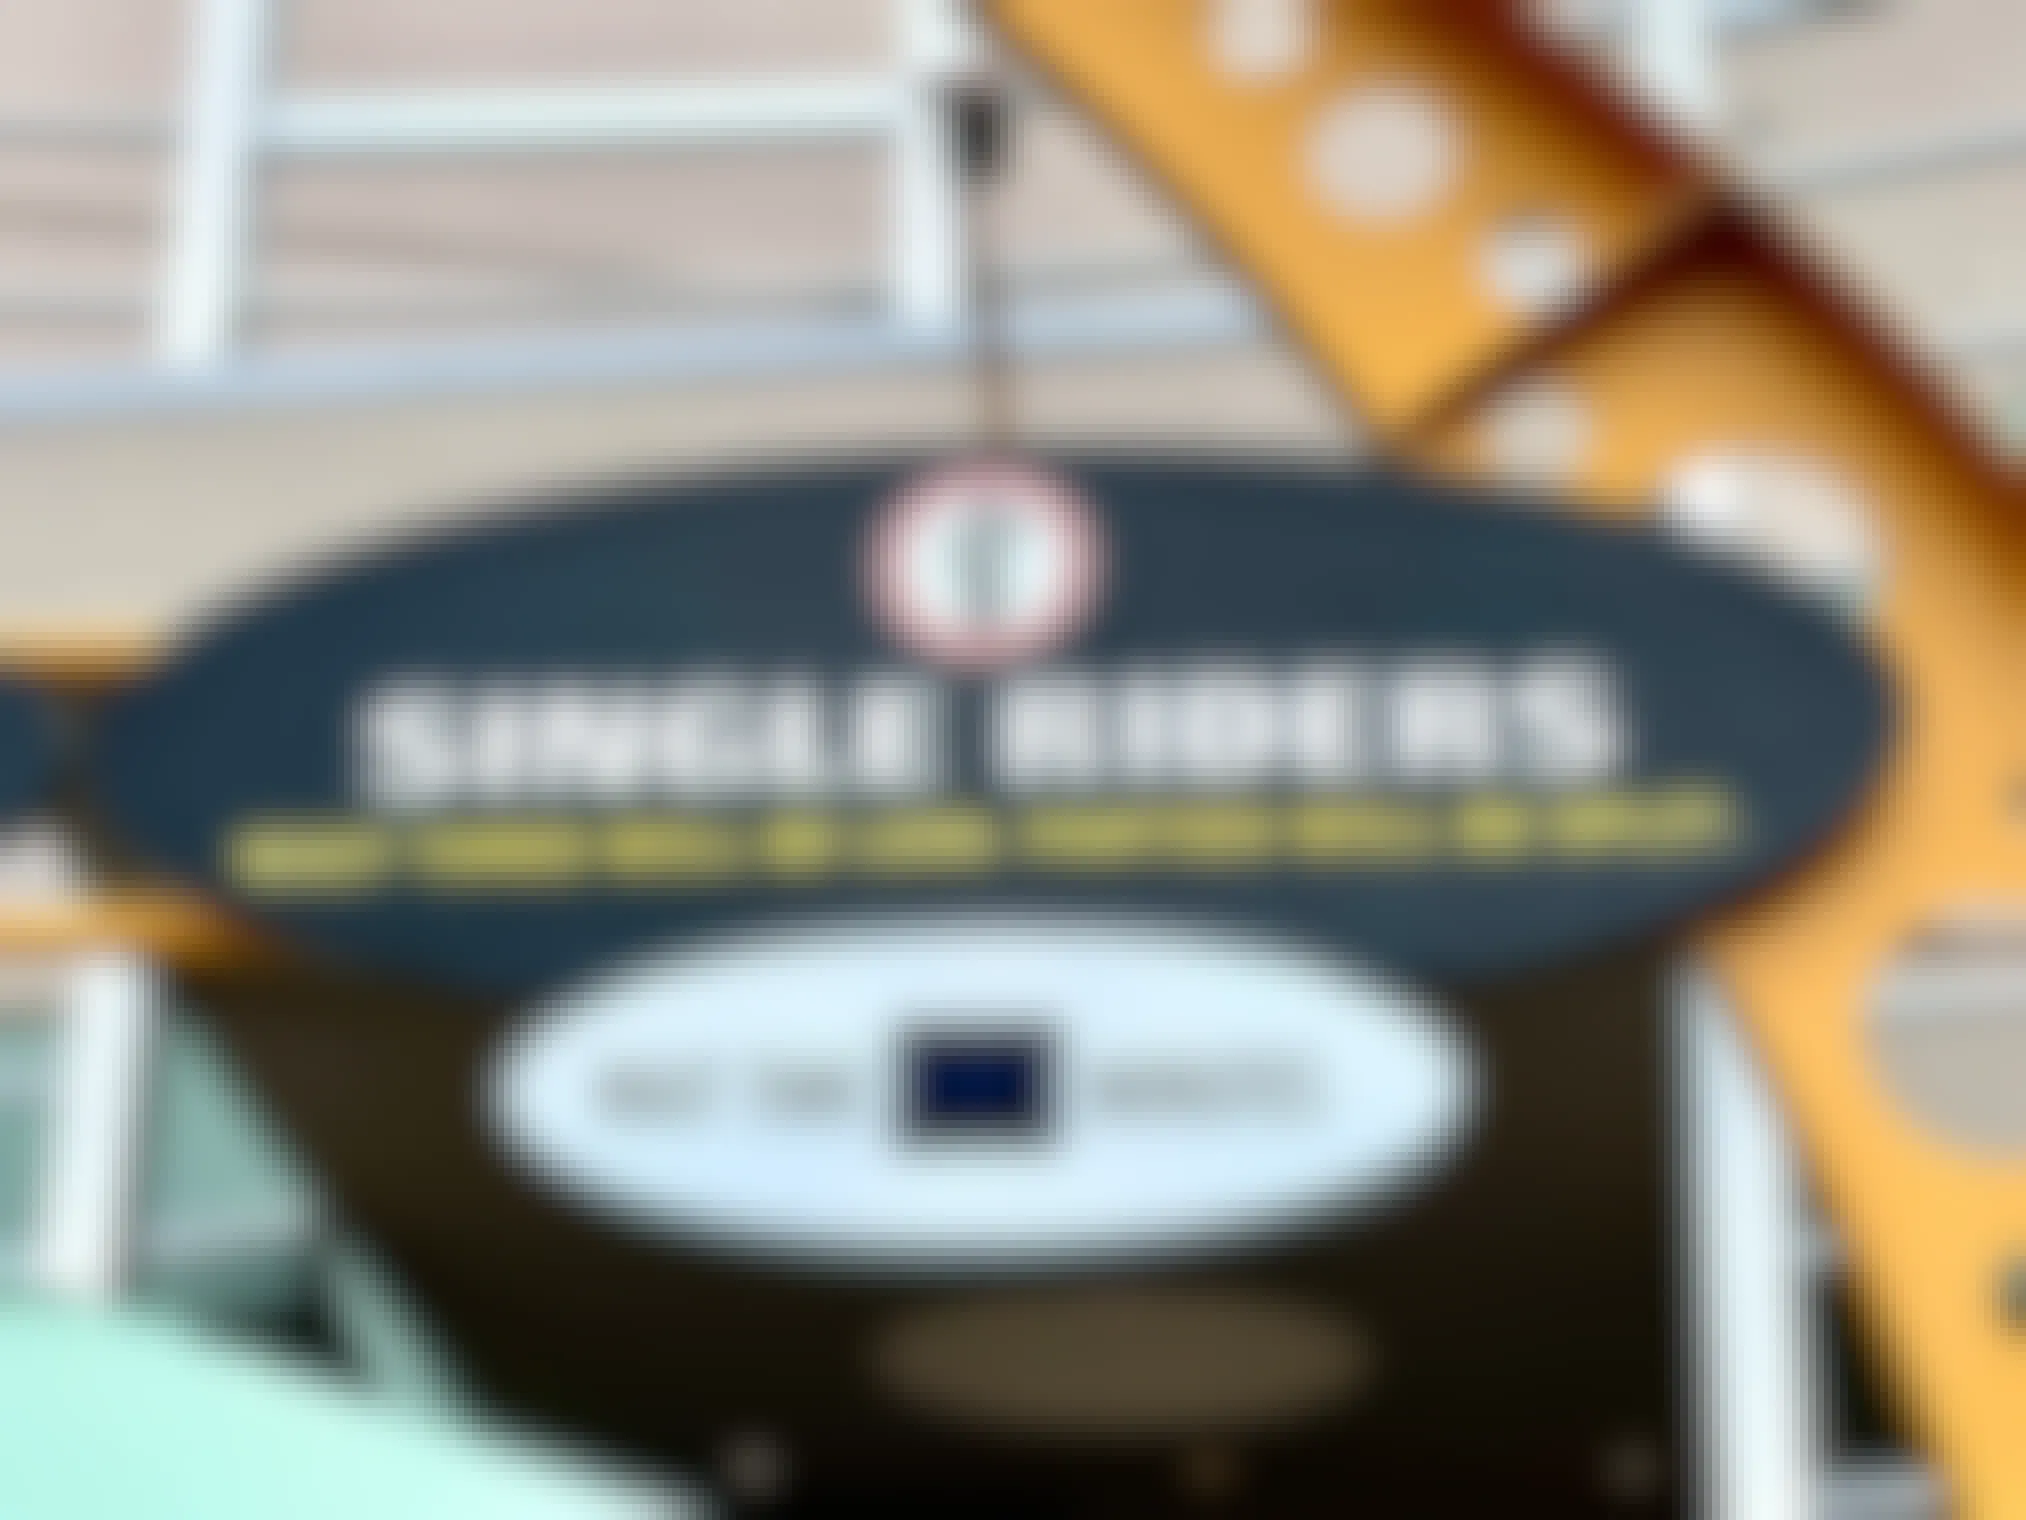 A sign for single riders outside of a ride at Universal Orlando